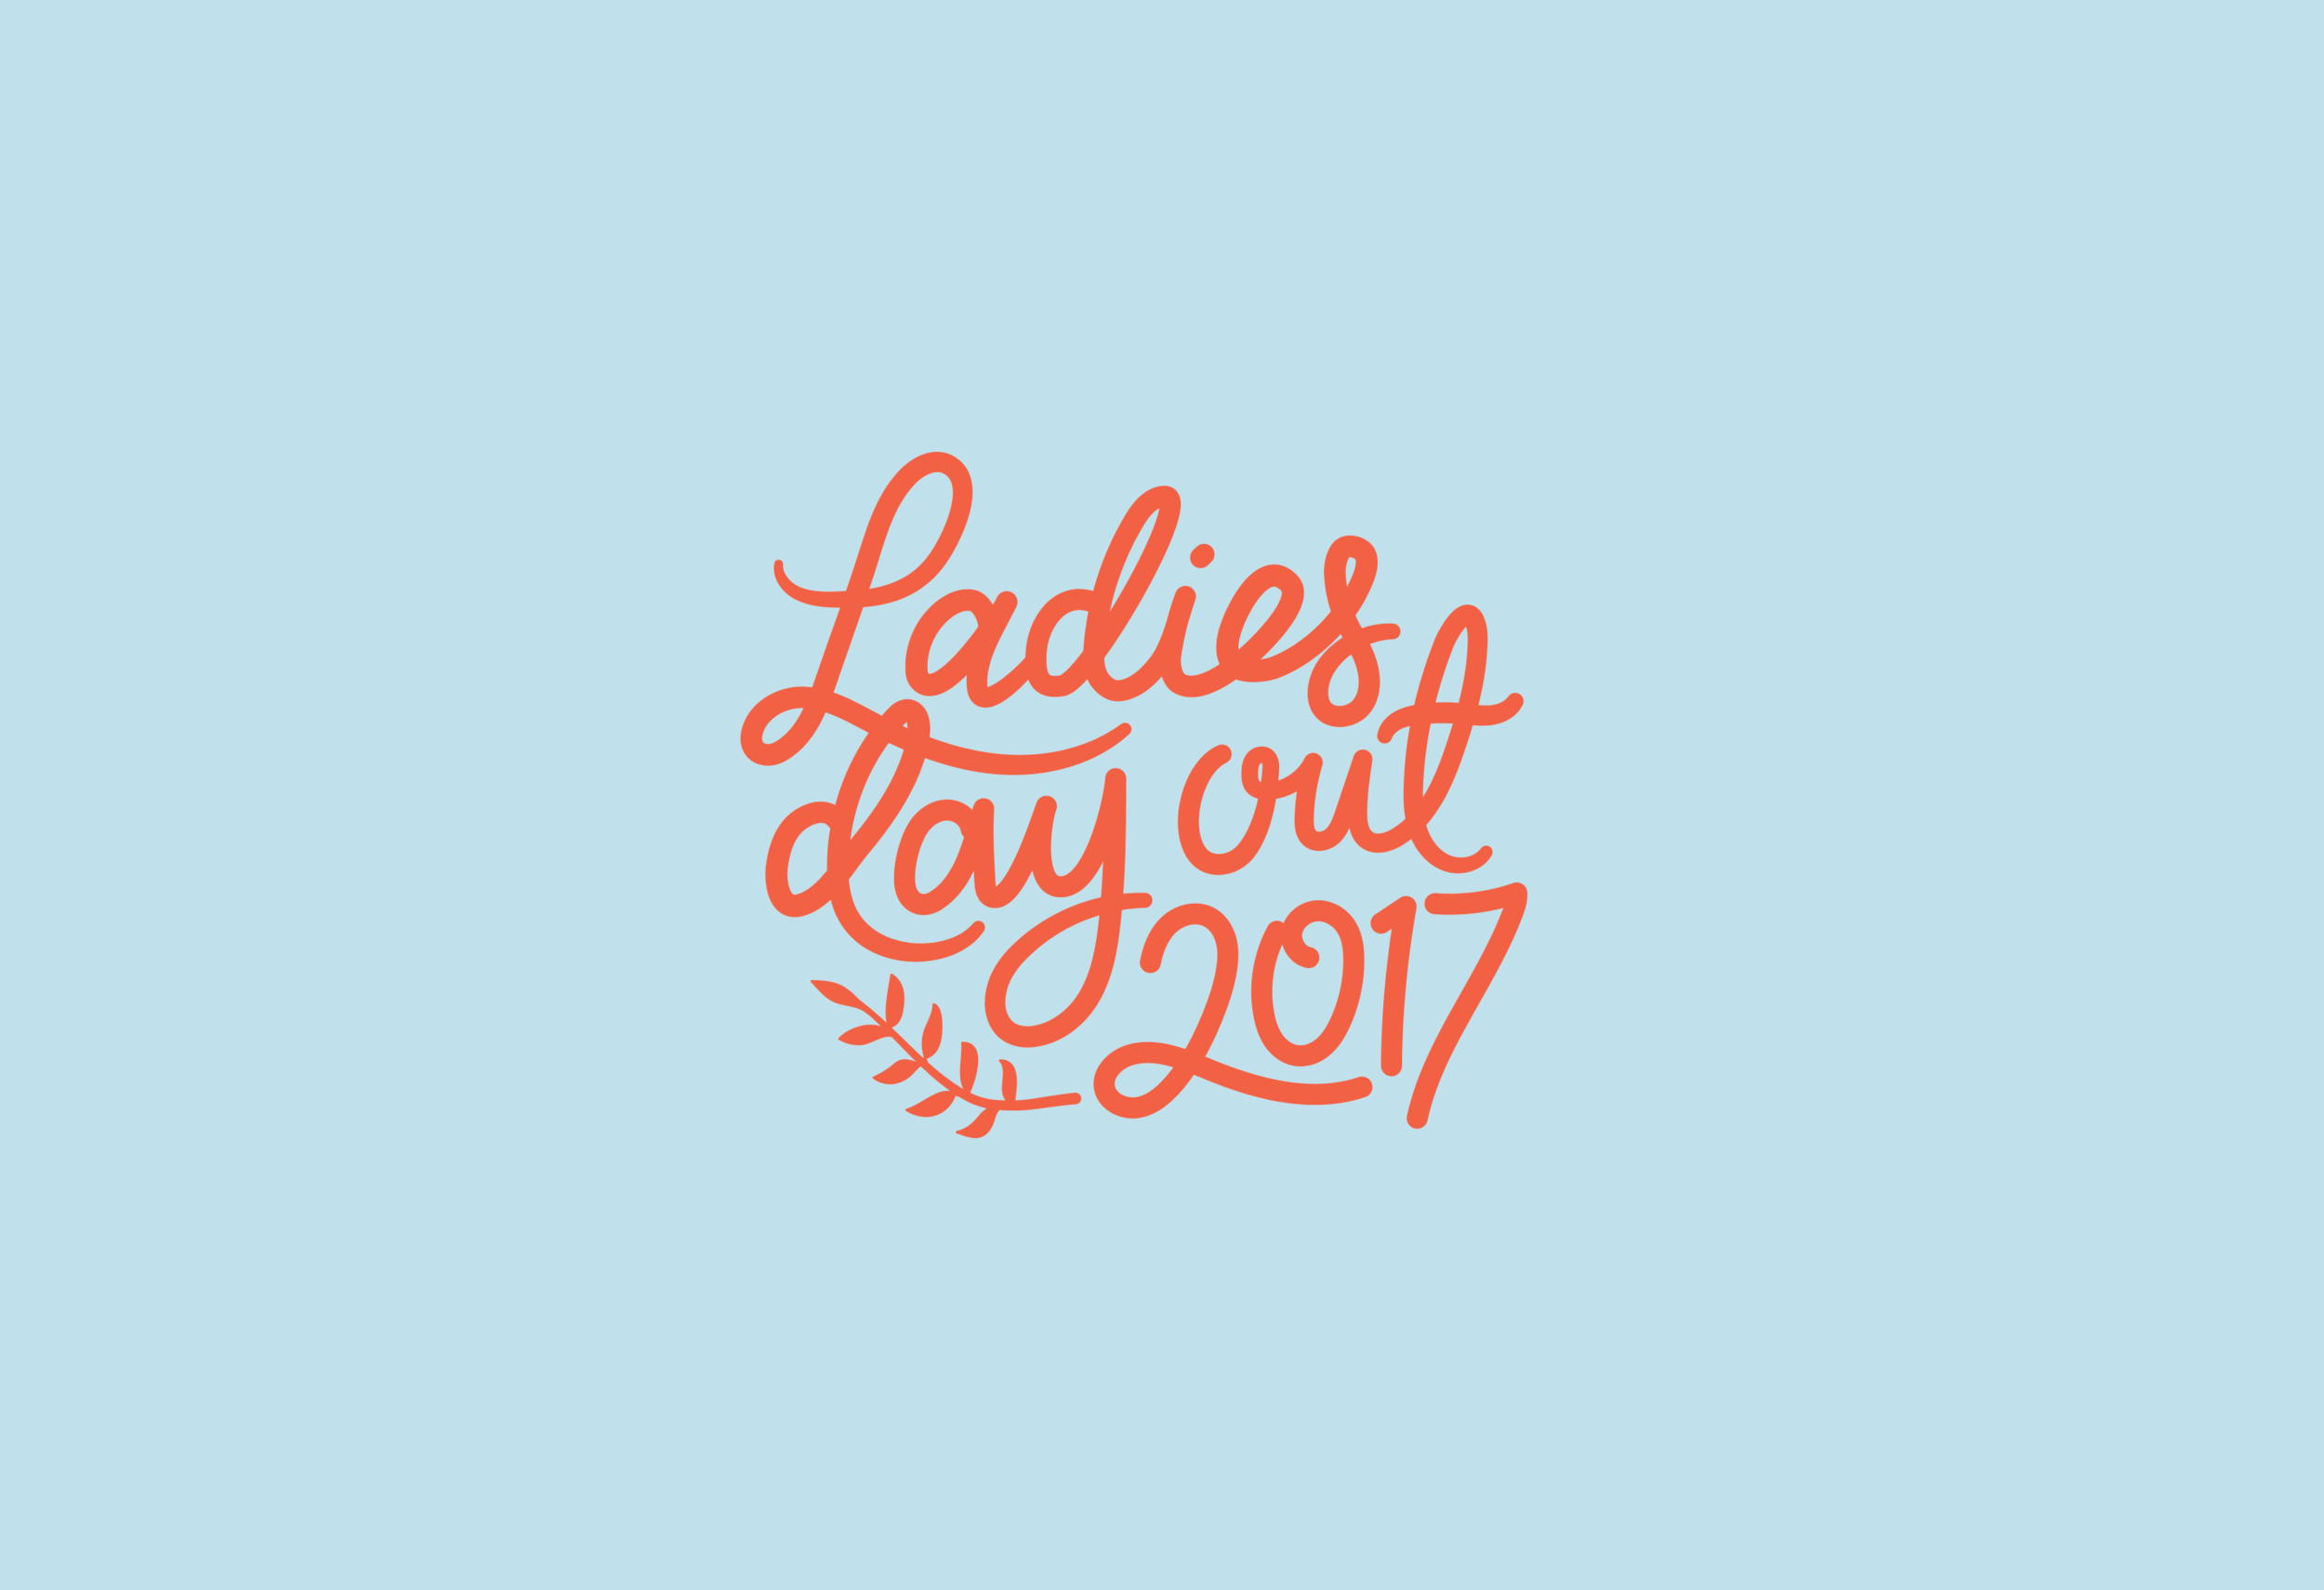 LadiesDayOut2017_text.png